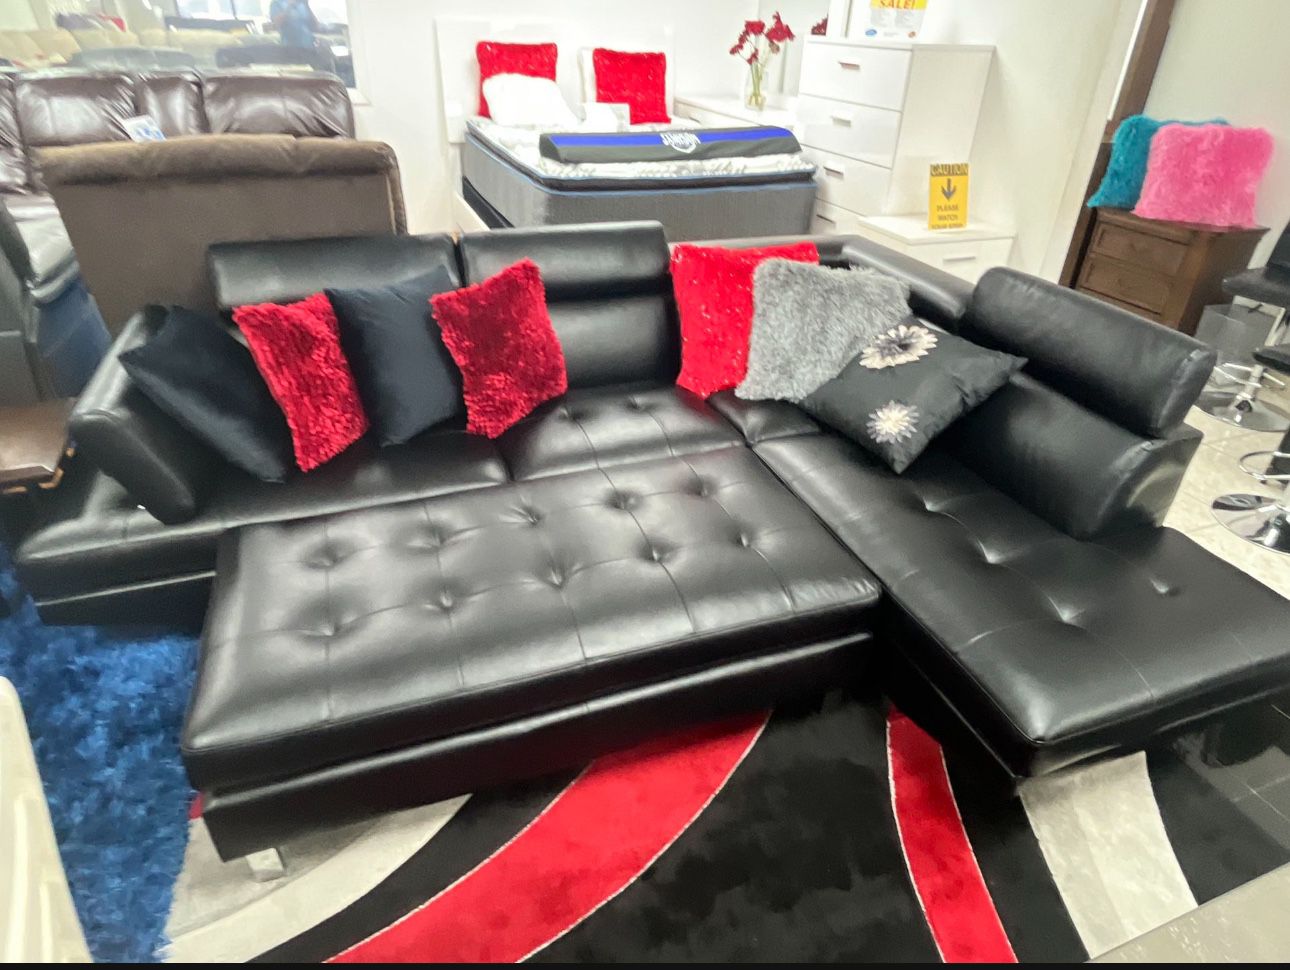 MEMORIAL DAY SALE!! COMFY NEW IBIZA SECTIONAL SOFA AND OTTOMAN SET ON SALE ONLY $799. IN STOCK SAME DAY DELIVERY 🚚 EASY FINANCING 